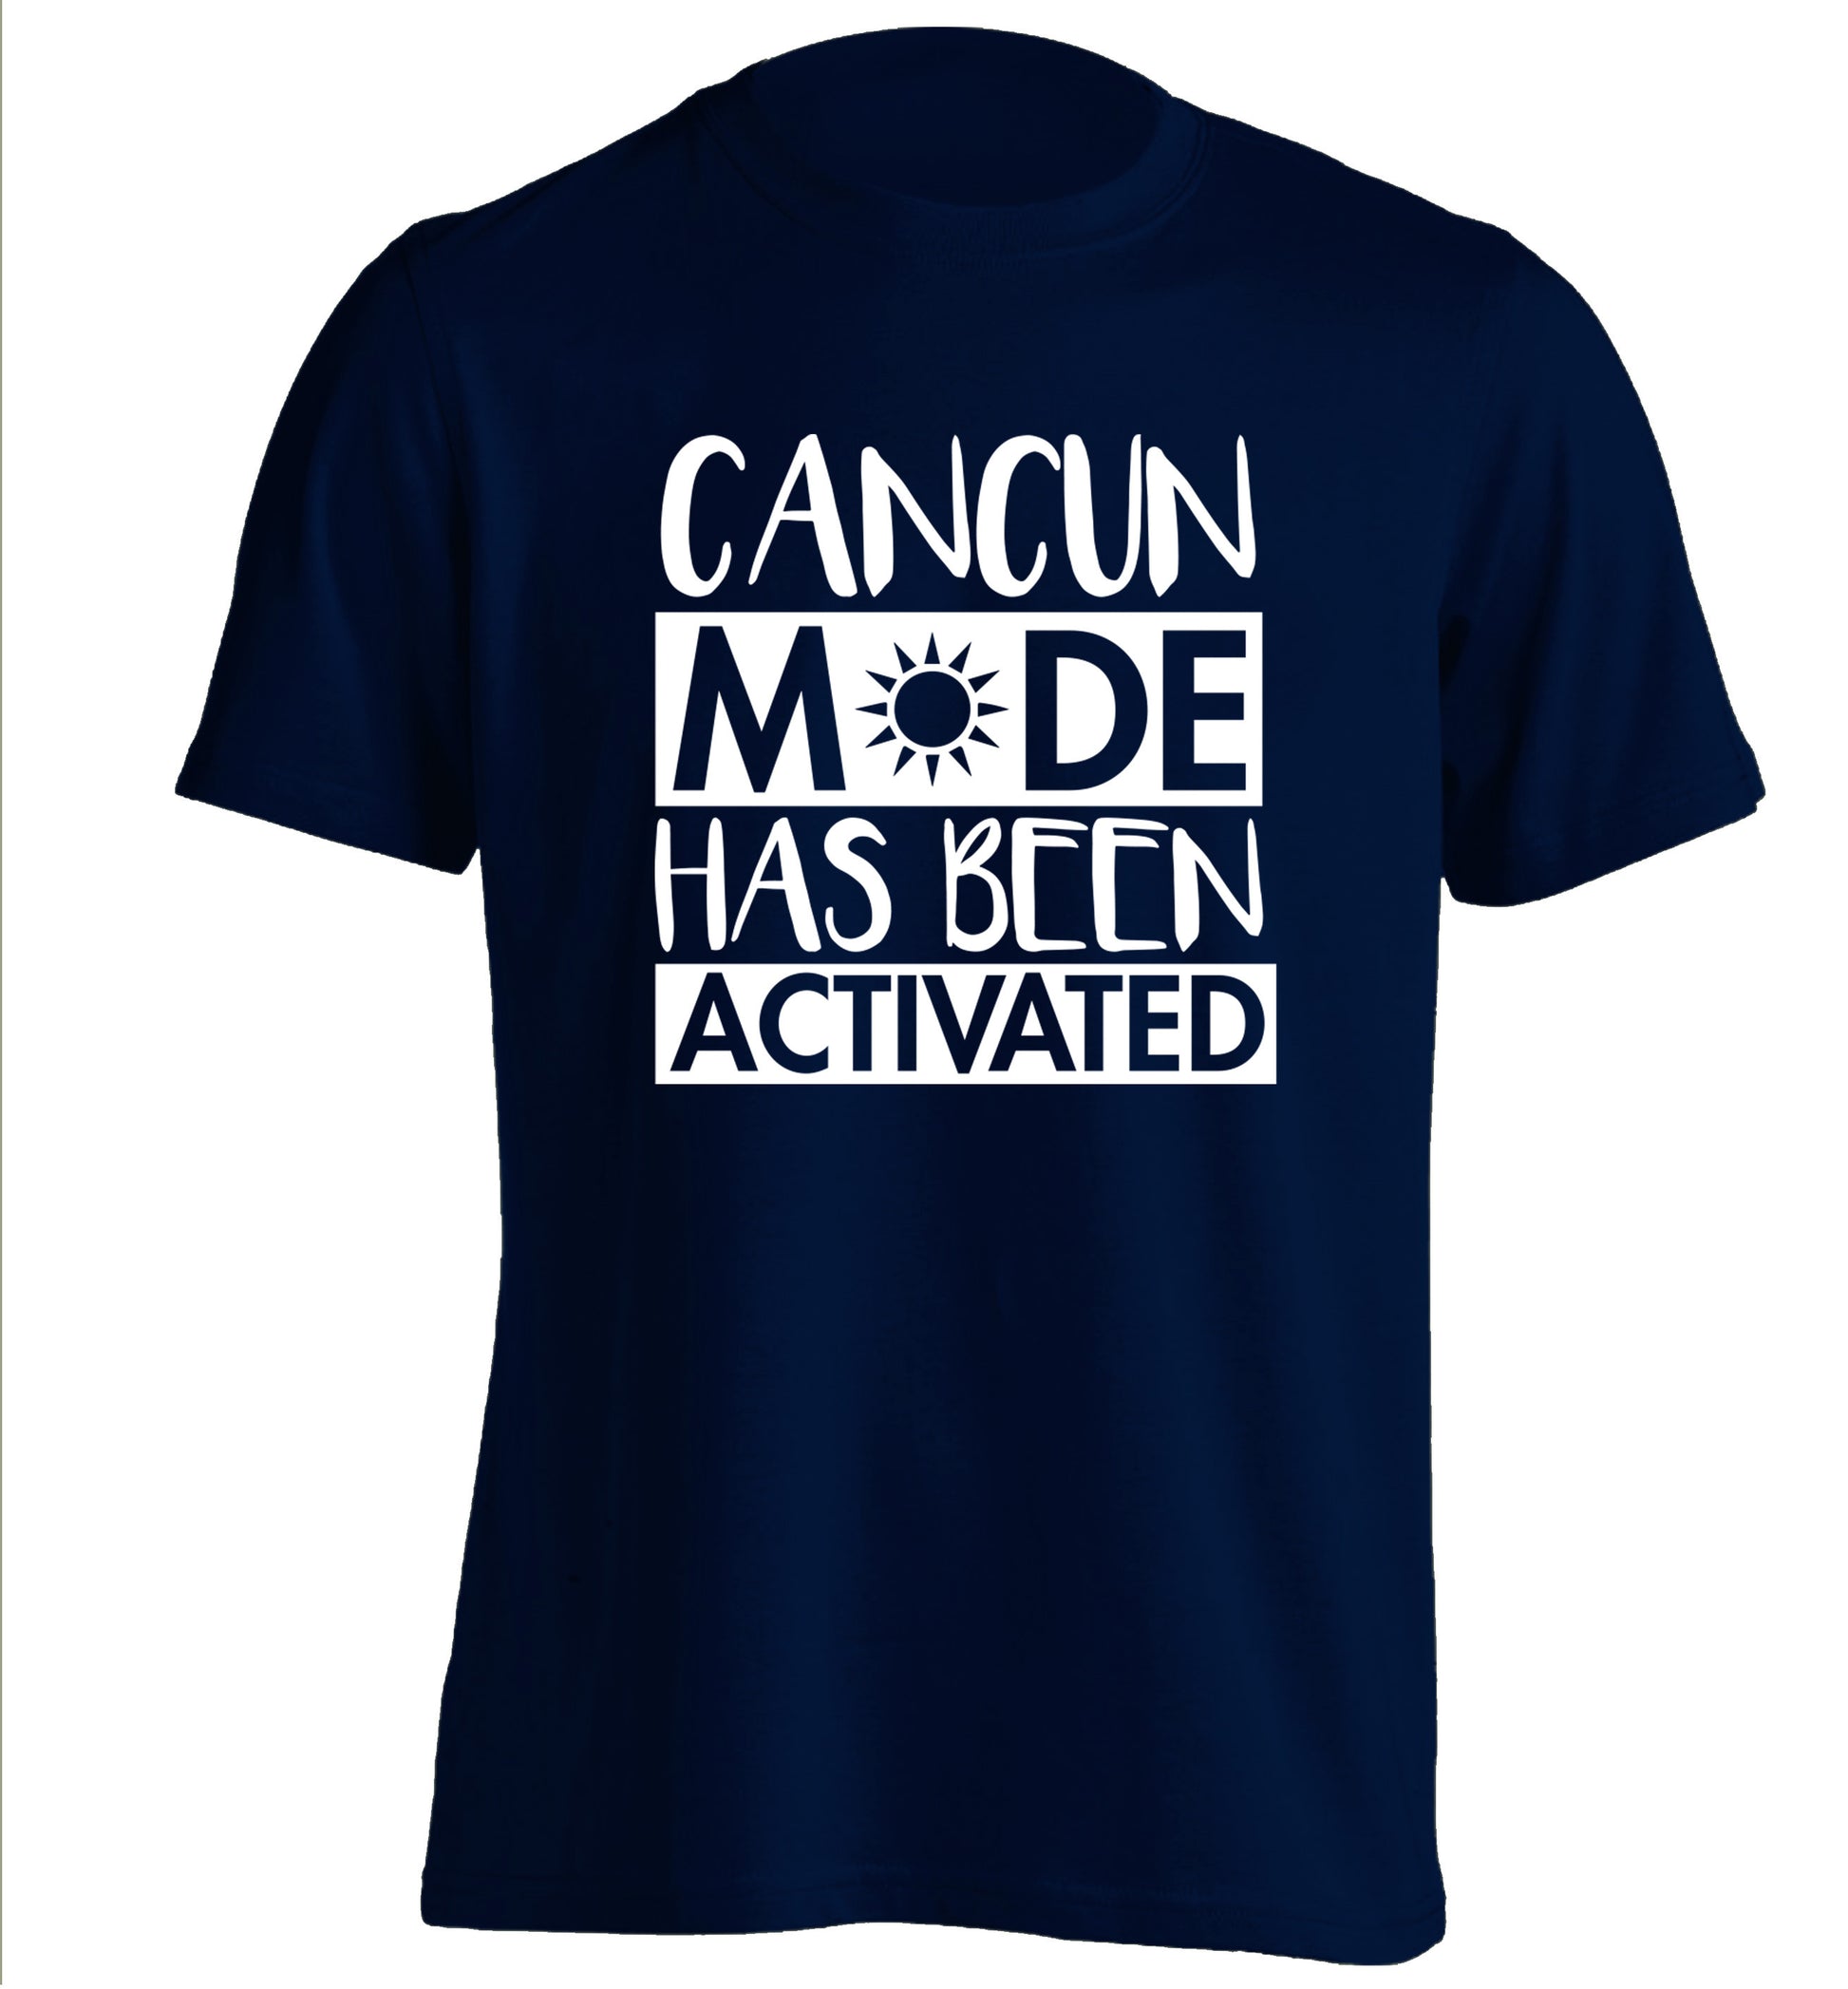 Cancun mode has been activated adults unisex navy Tshirt 2XL